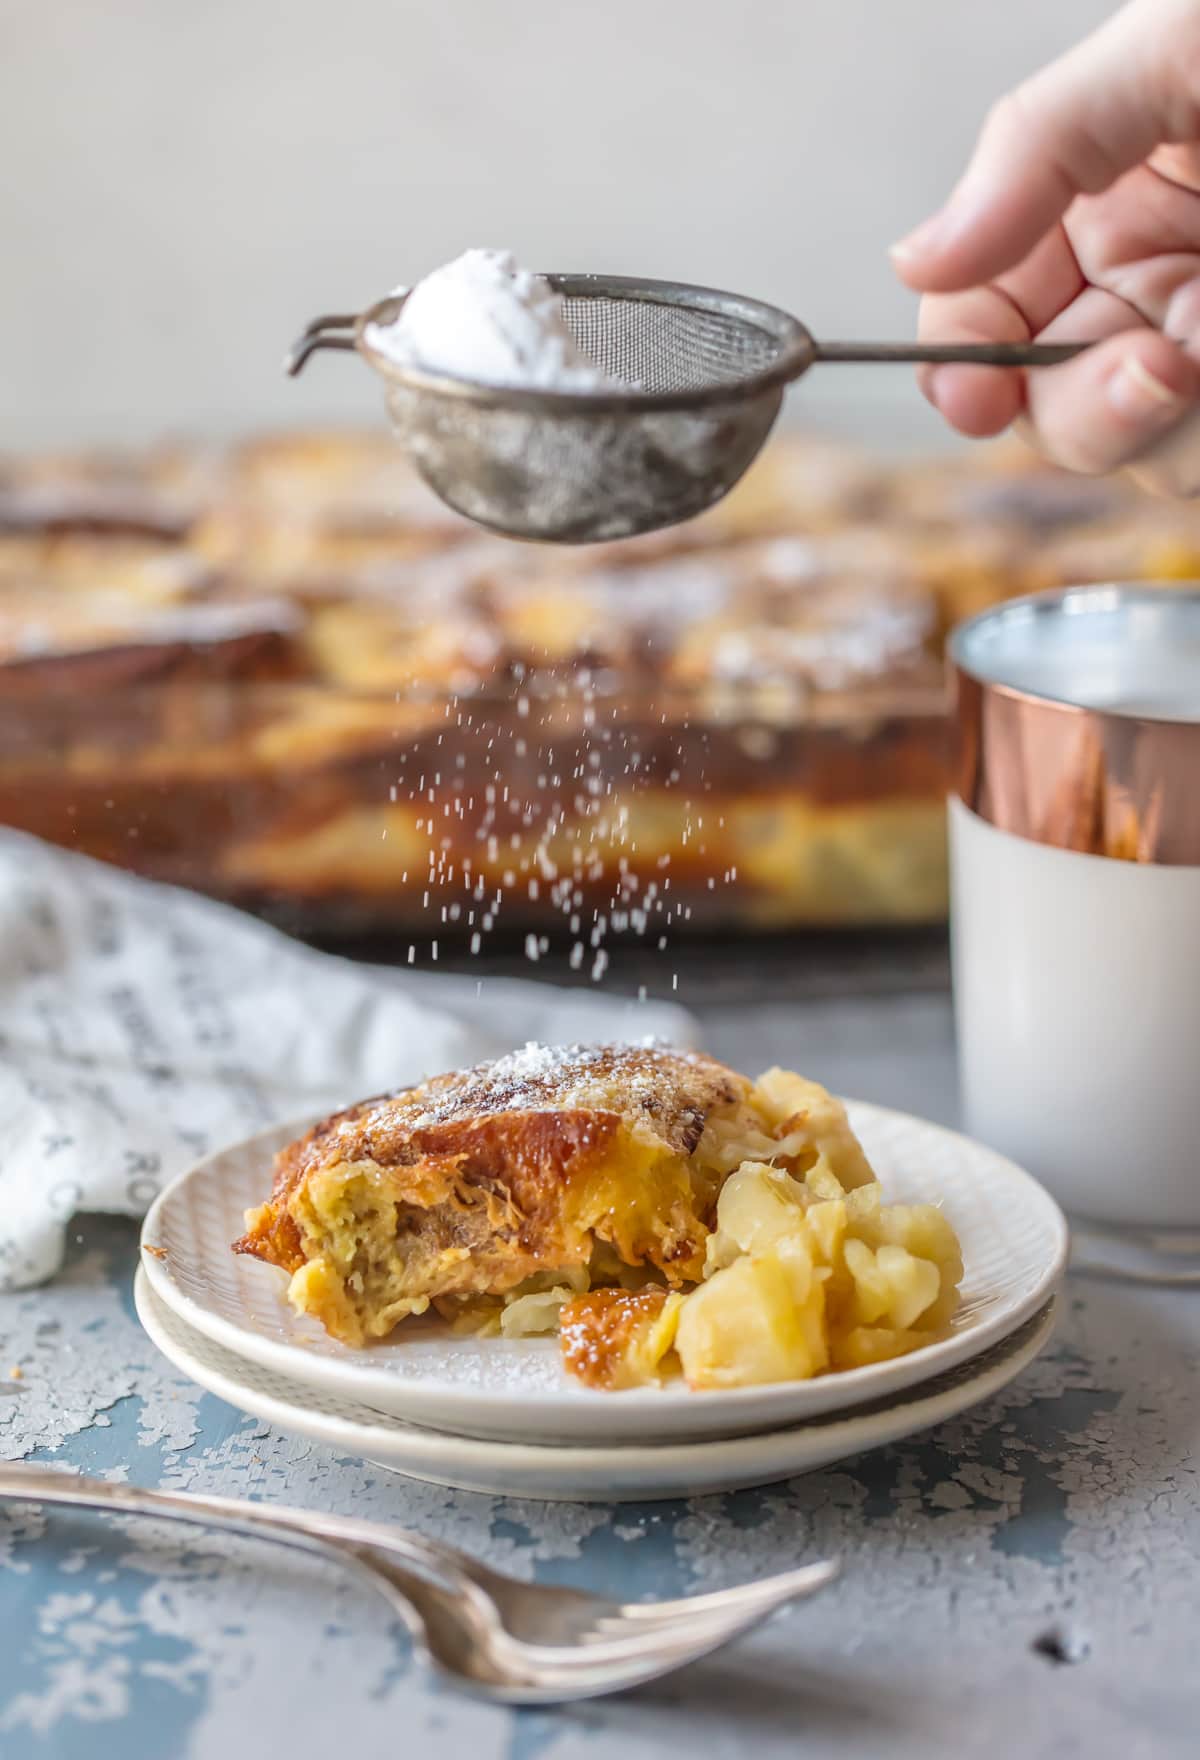 Sprinkling baked french toast with powdered sugar